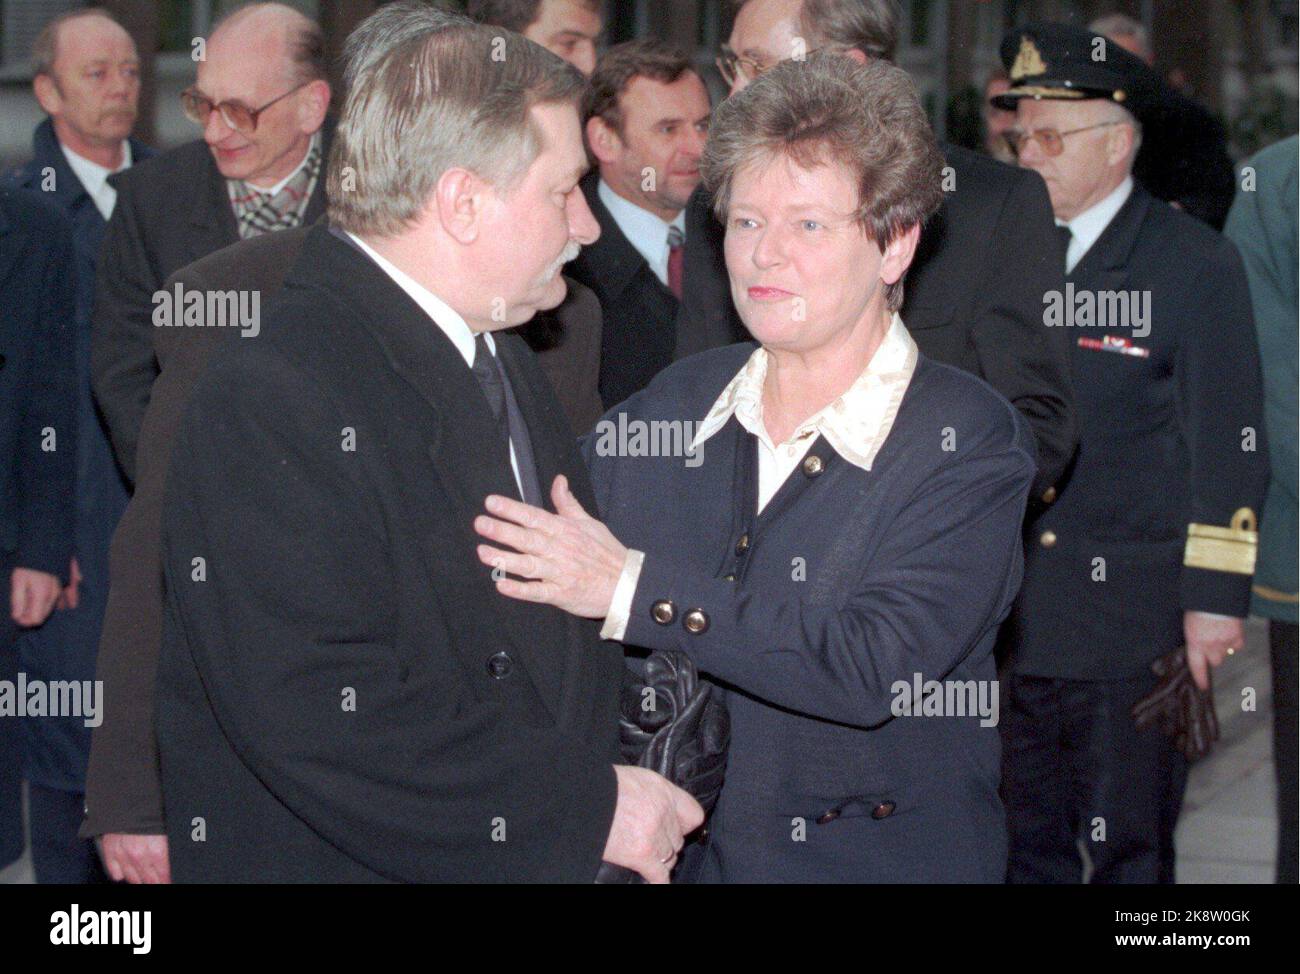 Oslo 19950315. Polish state visit to Norway. Poland President Lech Walesa and Mrs. Danuta on an official visit. Prime Minister Gro Harlem Brundtland received Poland President Lech Walesa for talks in the government building. Photo: Johnny Syversen NTB Stock Photo